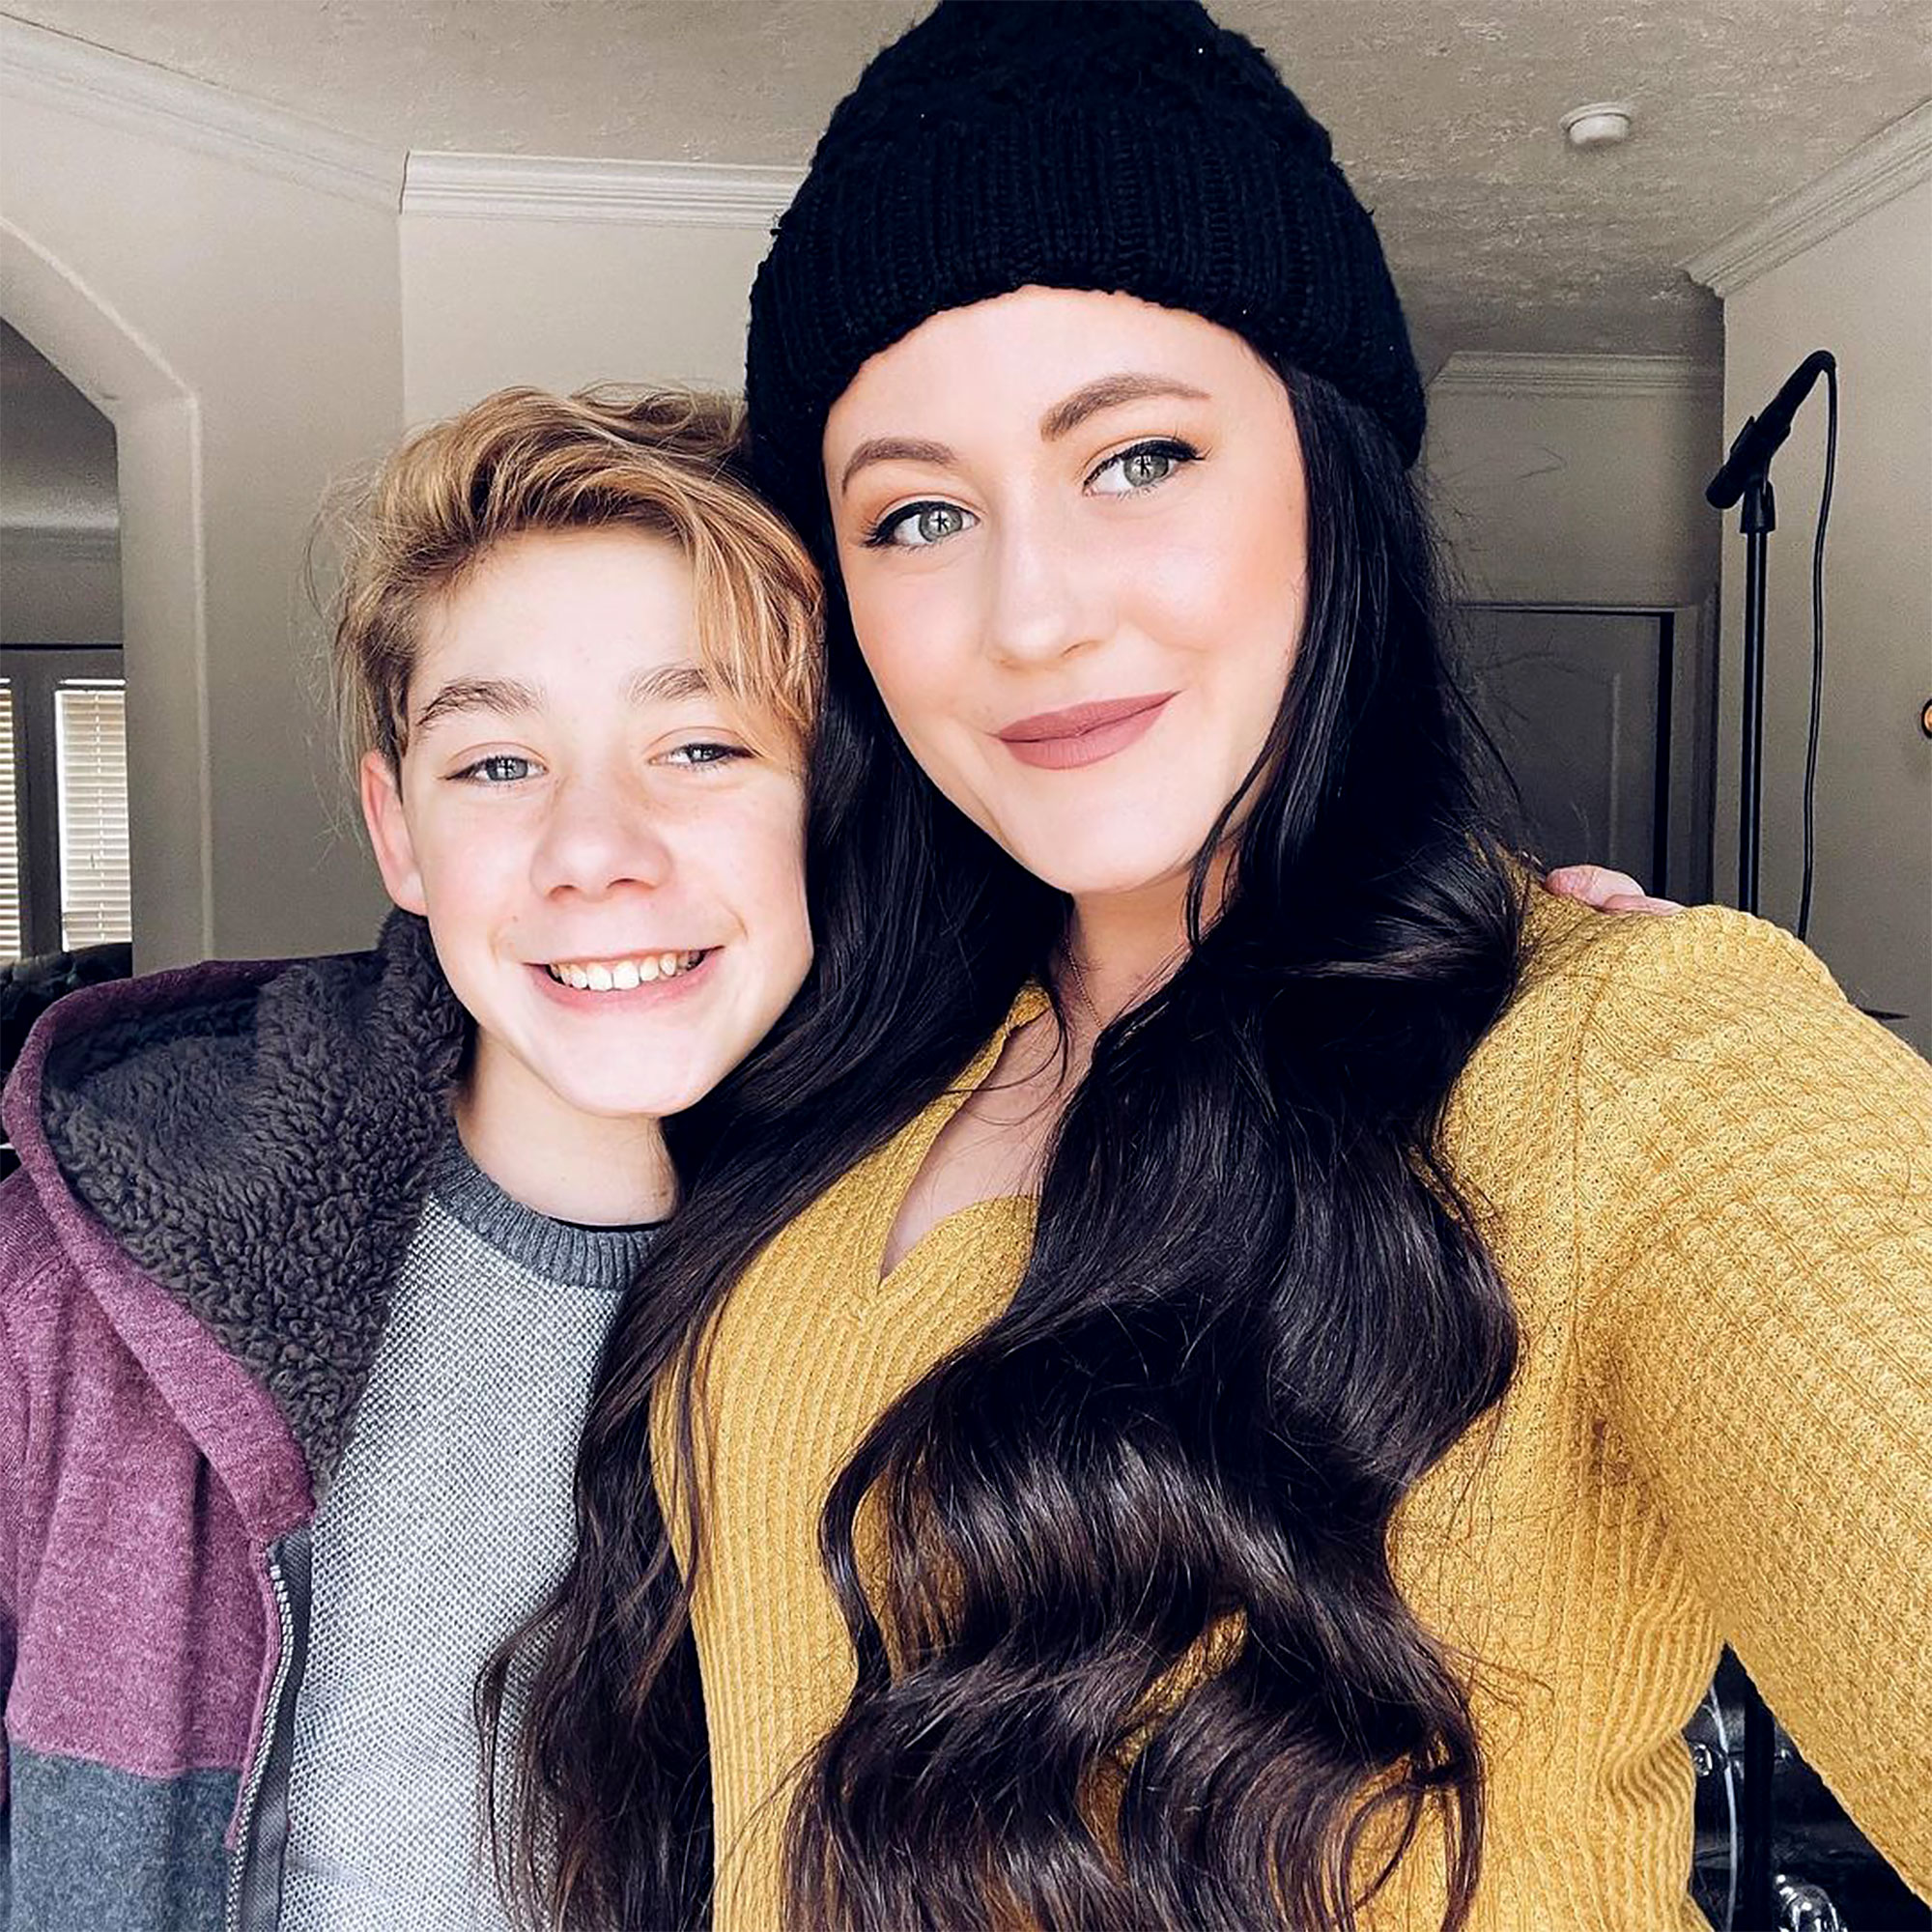 Teen Mom 2s Jenelle Evans Son Jace, 12, Looks Grown Up New Photos